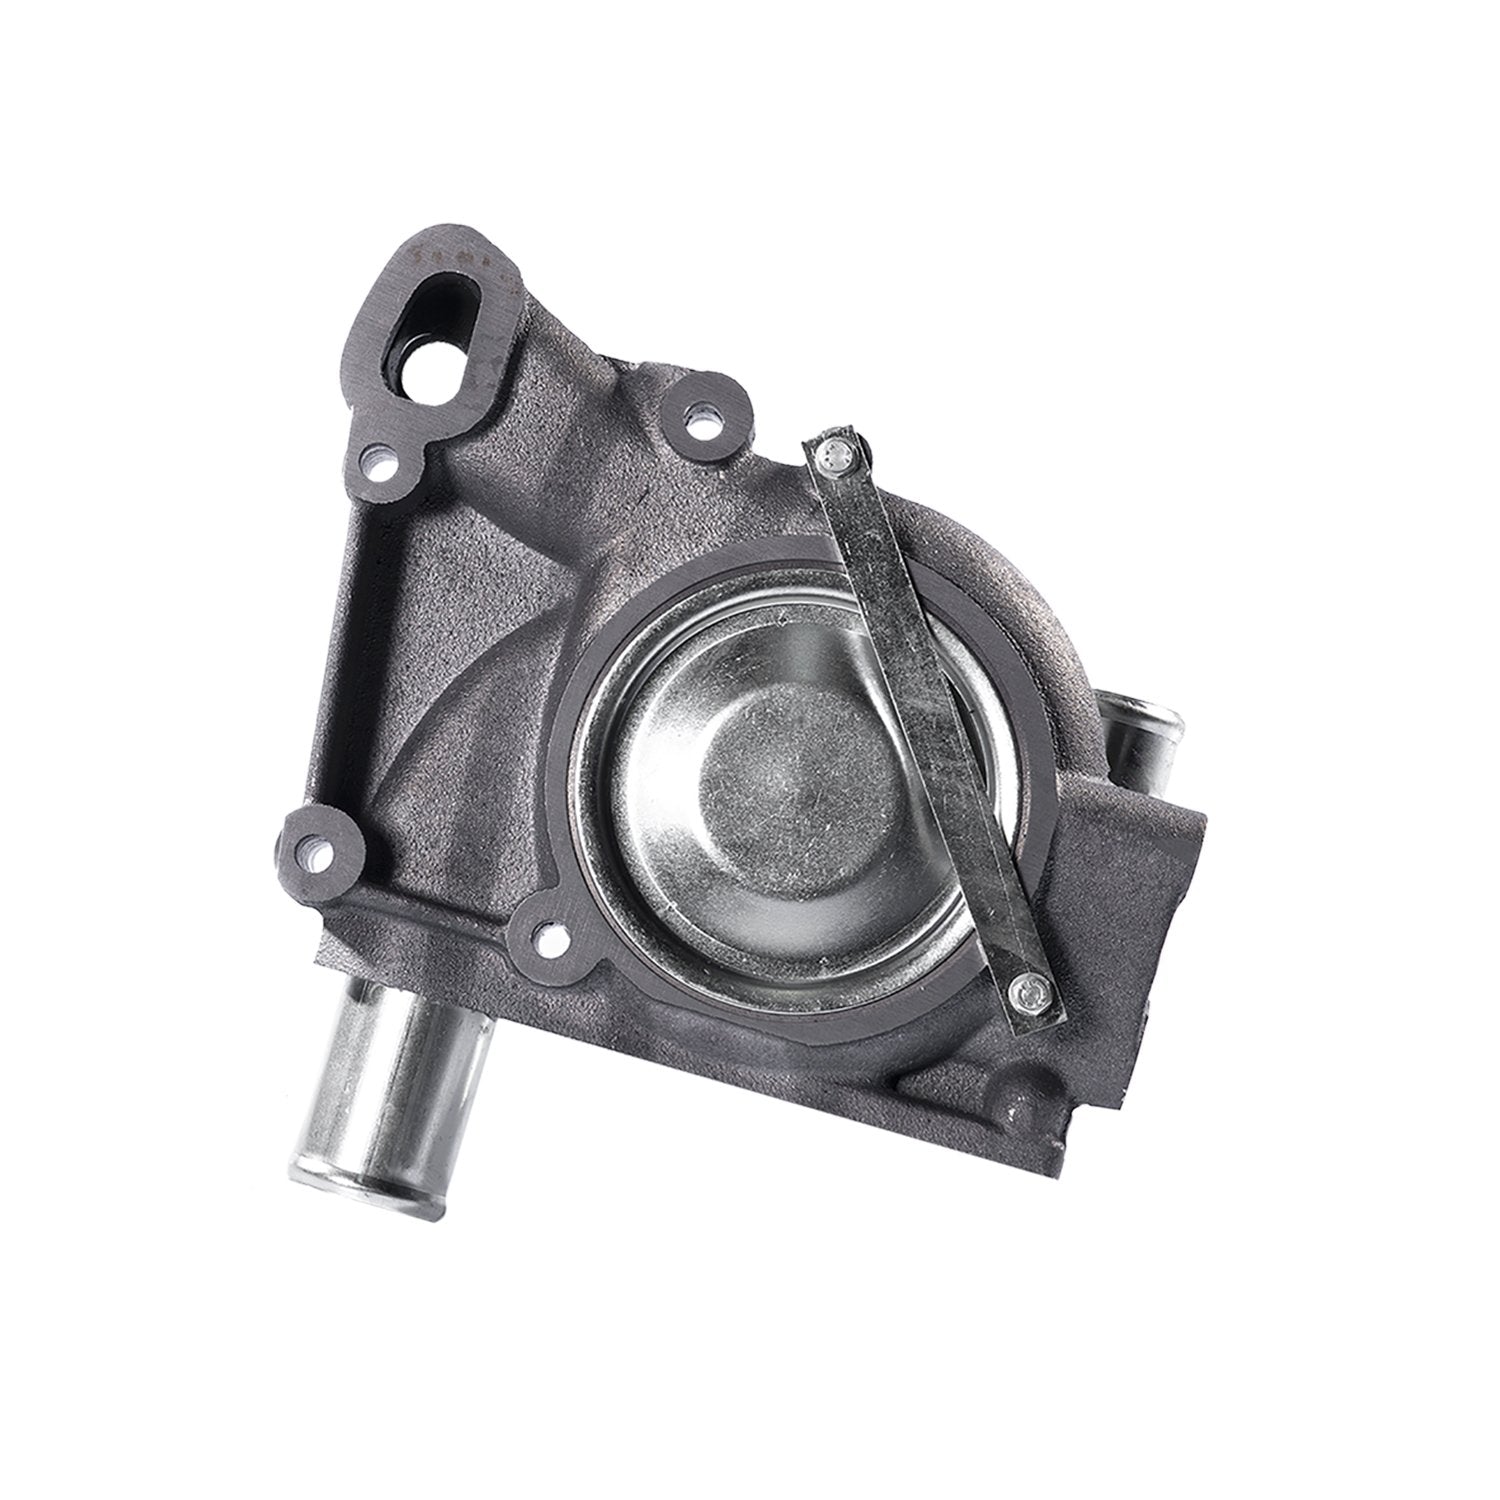 Water Pump Replacement For STEYR 131100060034 131100060901E 74721003 131100060901